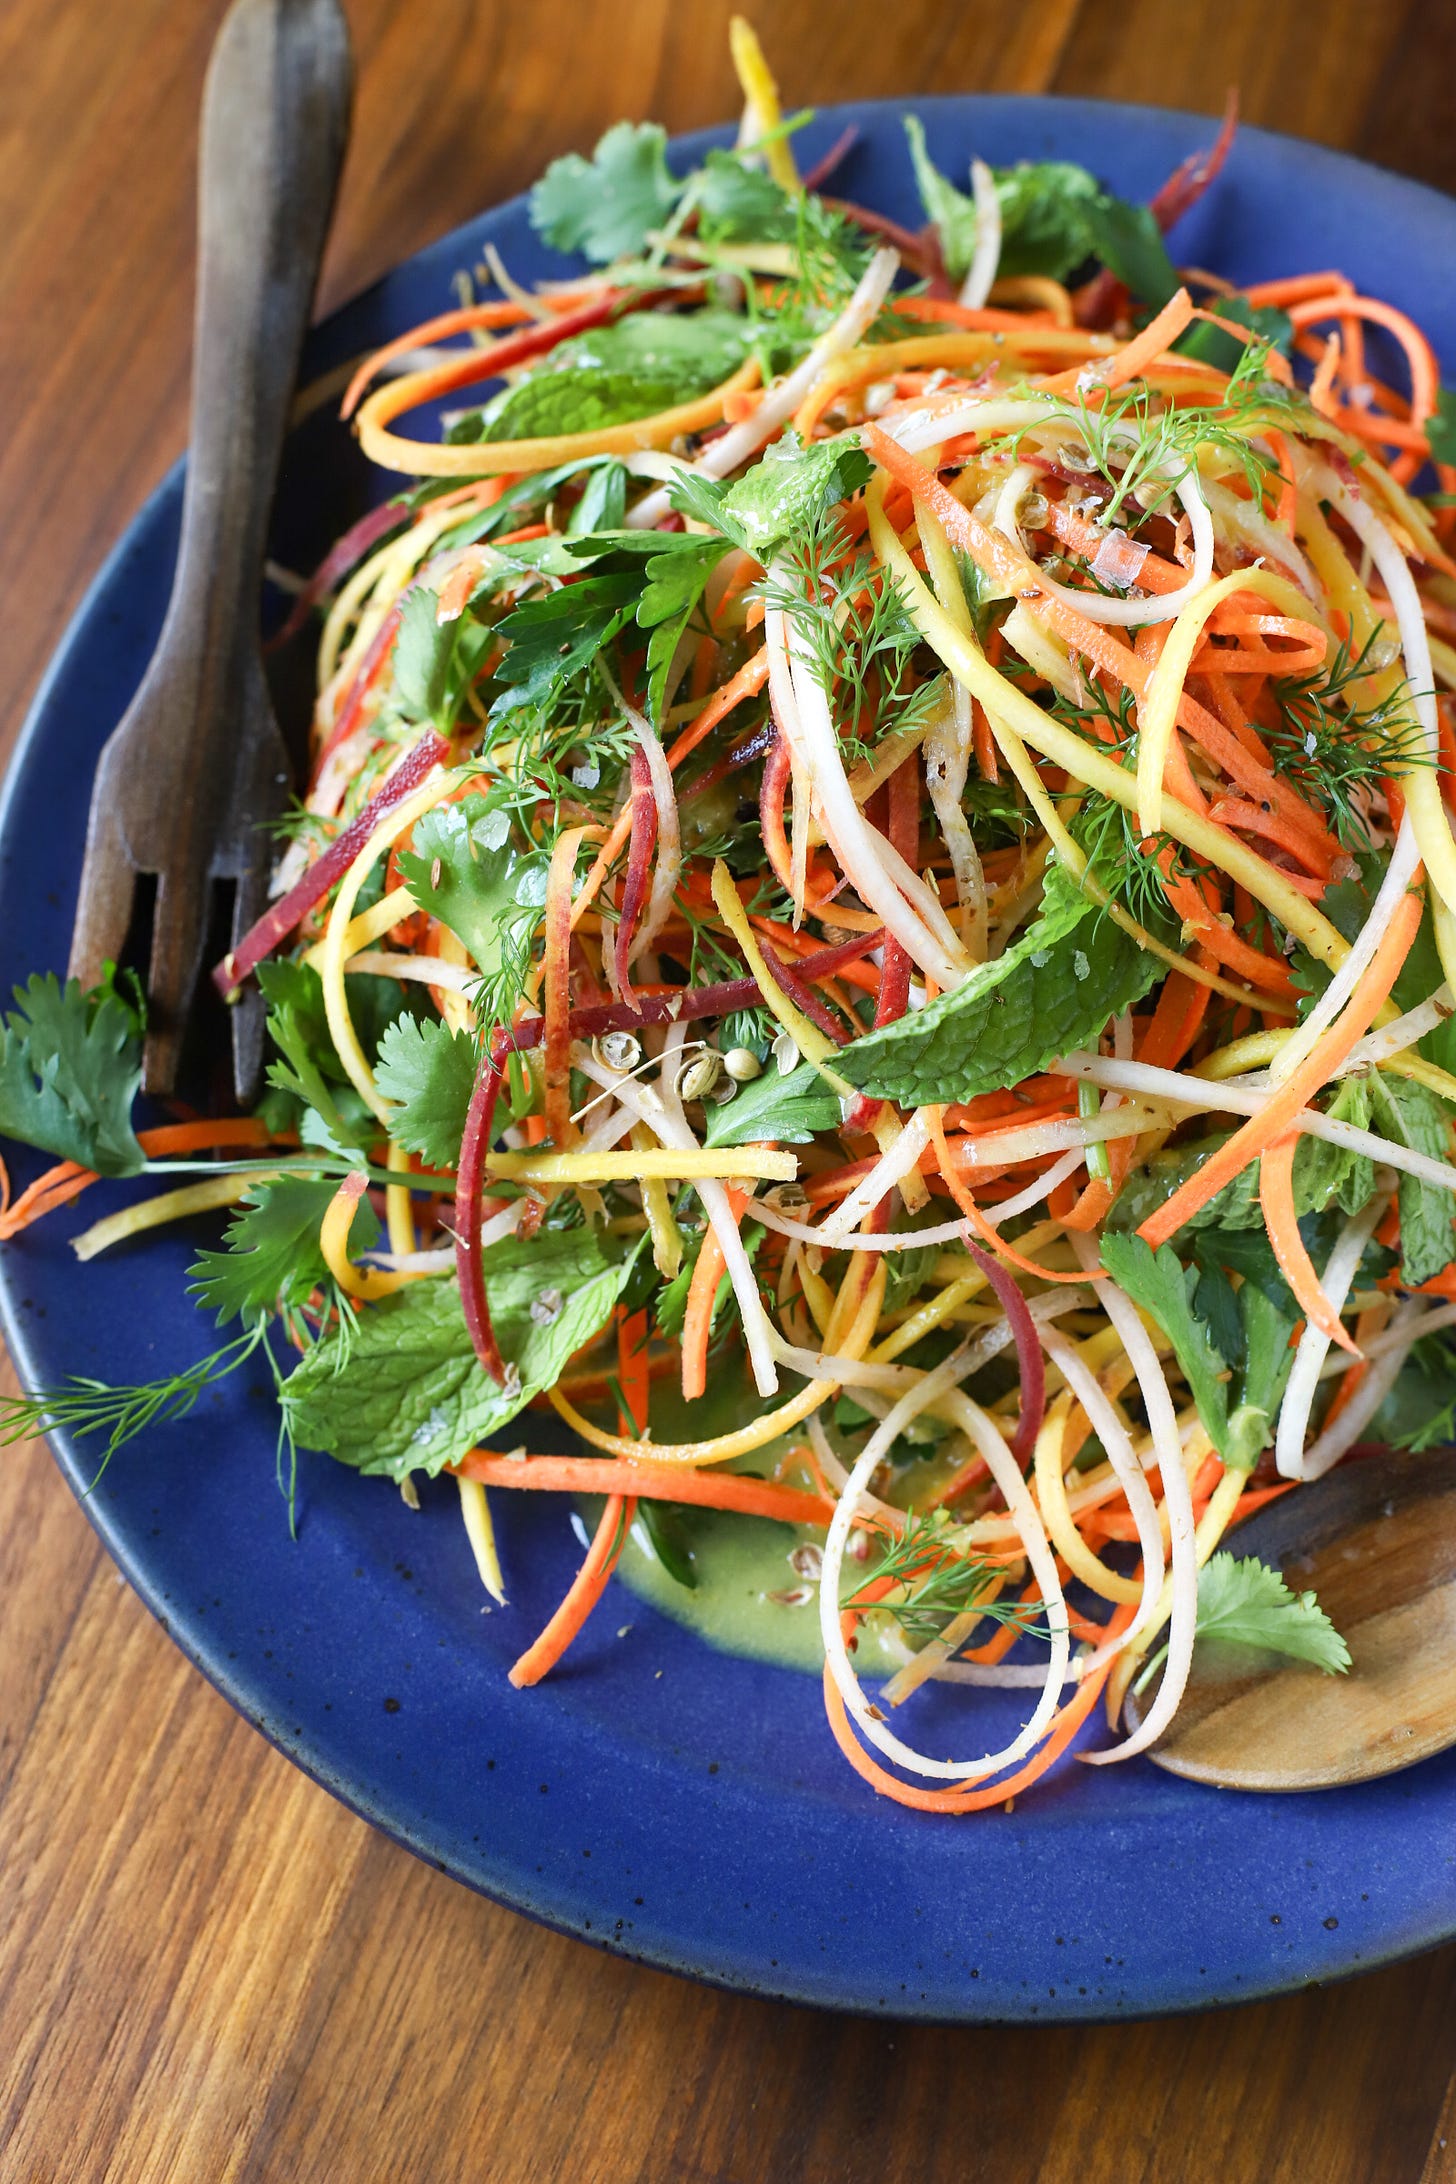 Grated carrots and herb salad on blue plate